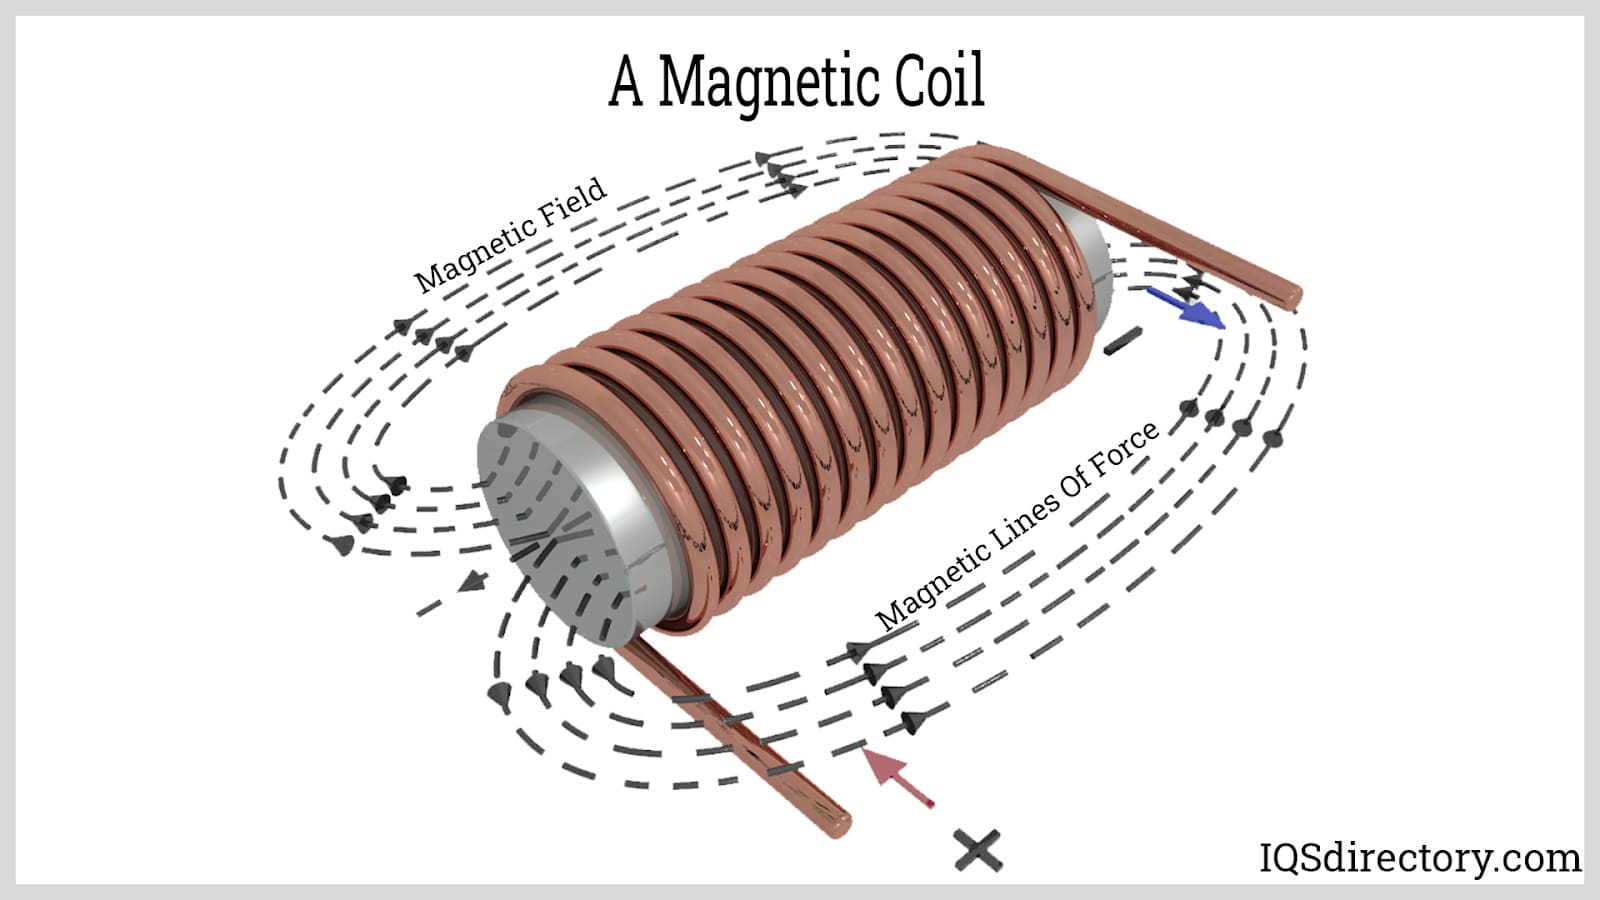 A Magnetic Coil